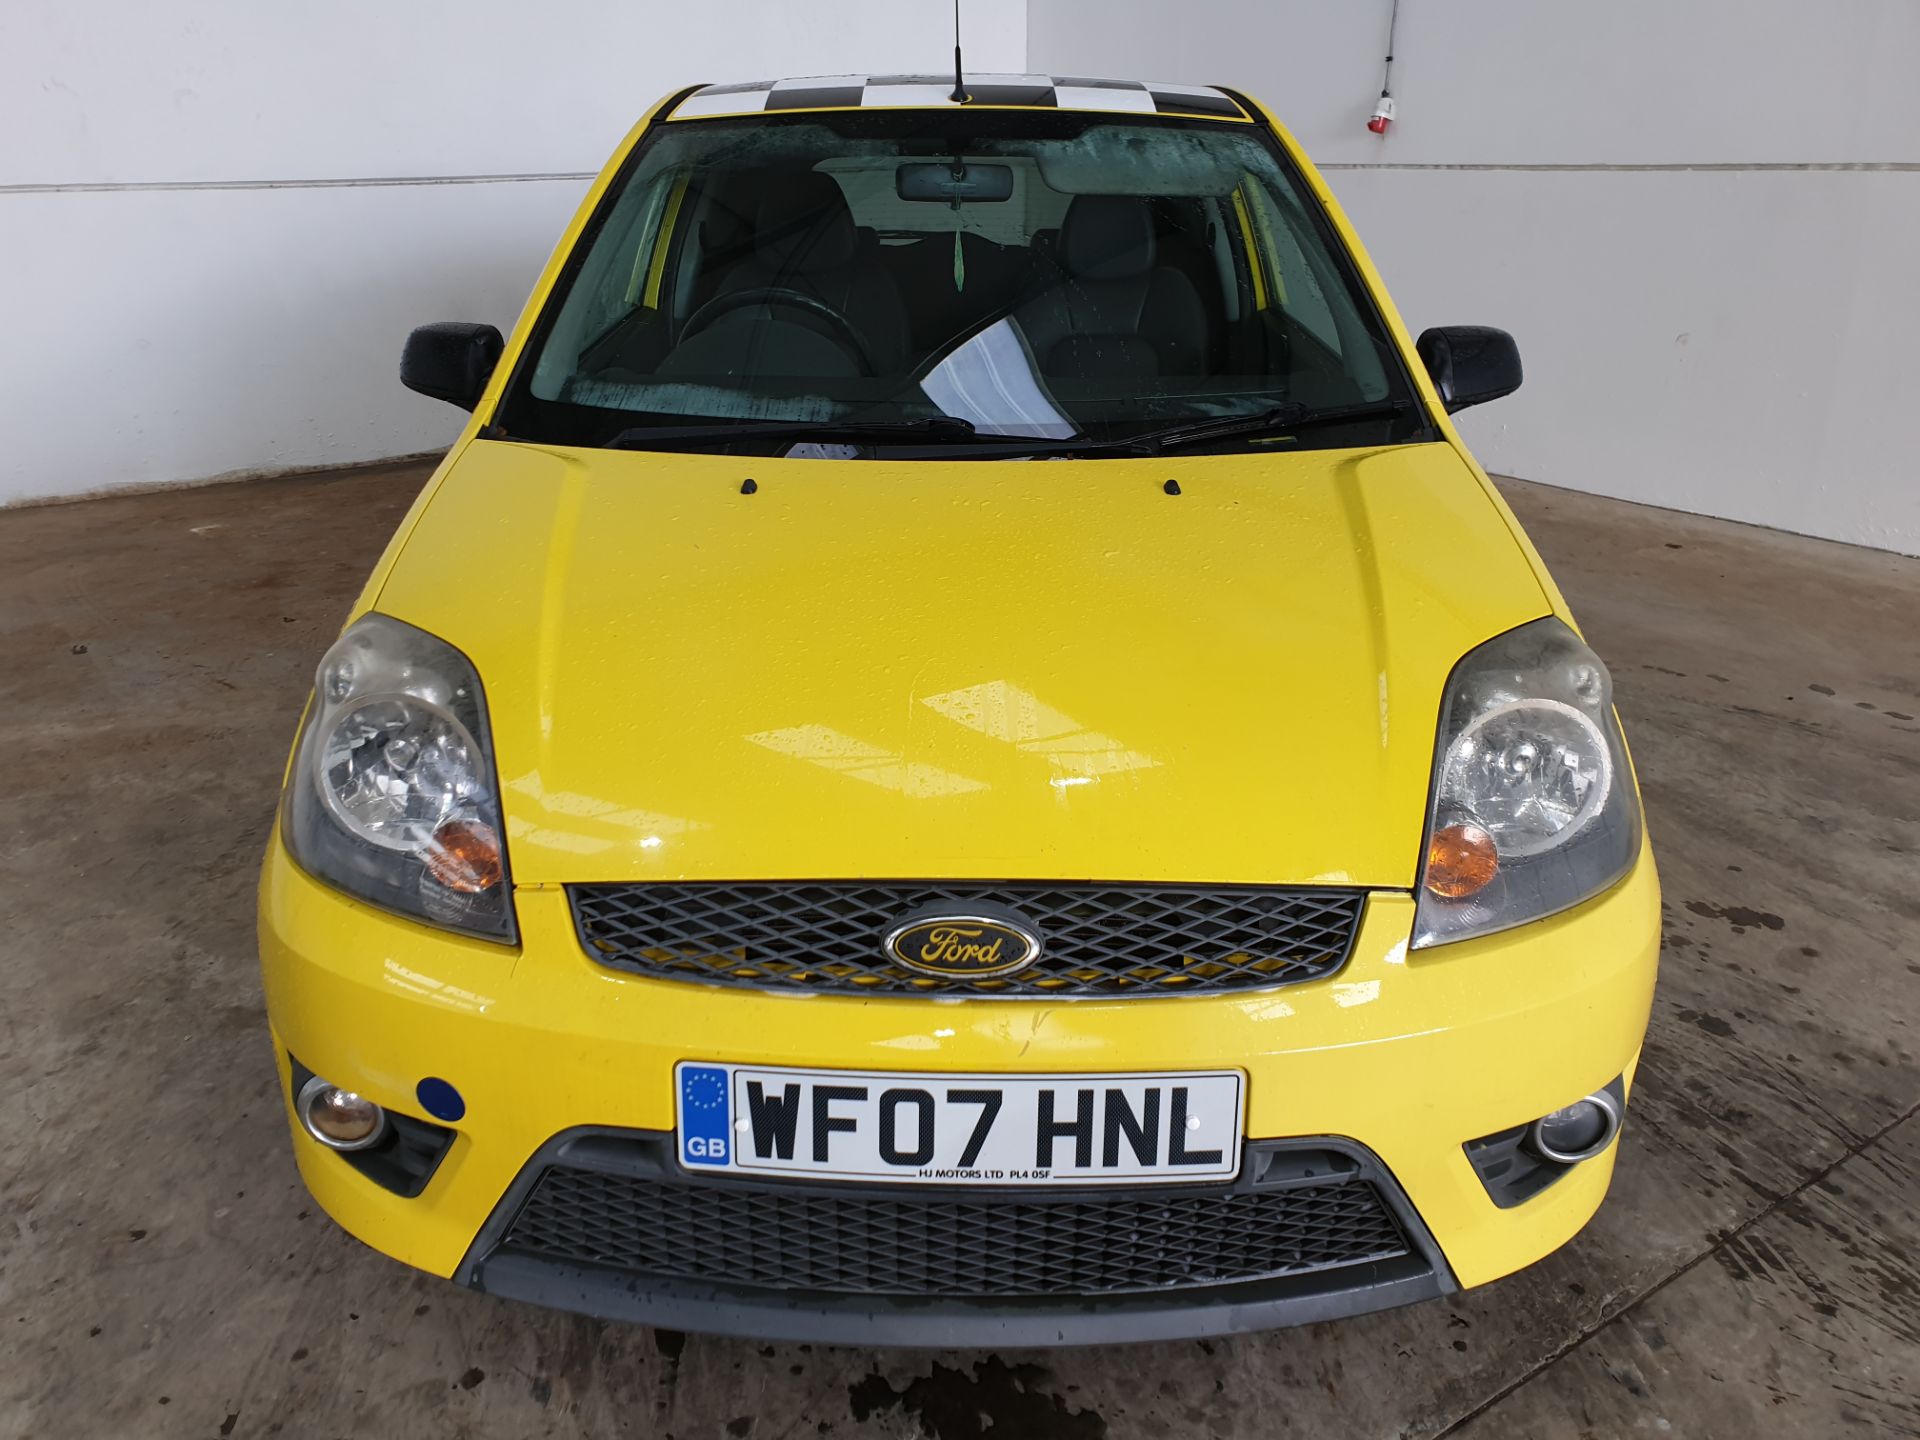 2007 Ford Fiesta Zetec S Special edition - Image 8 of 13